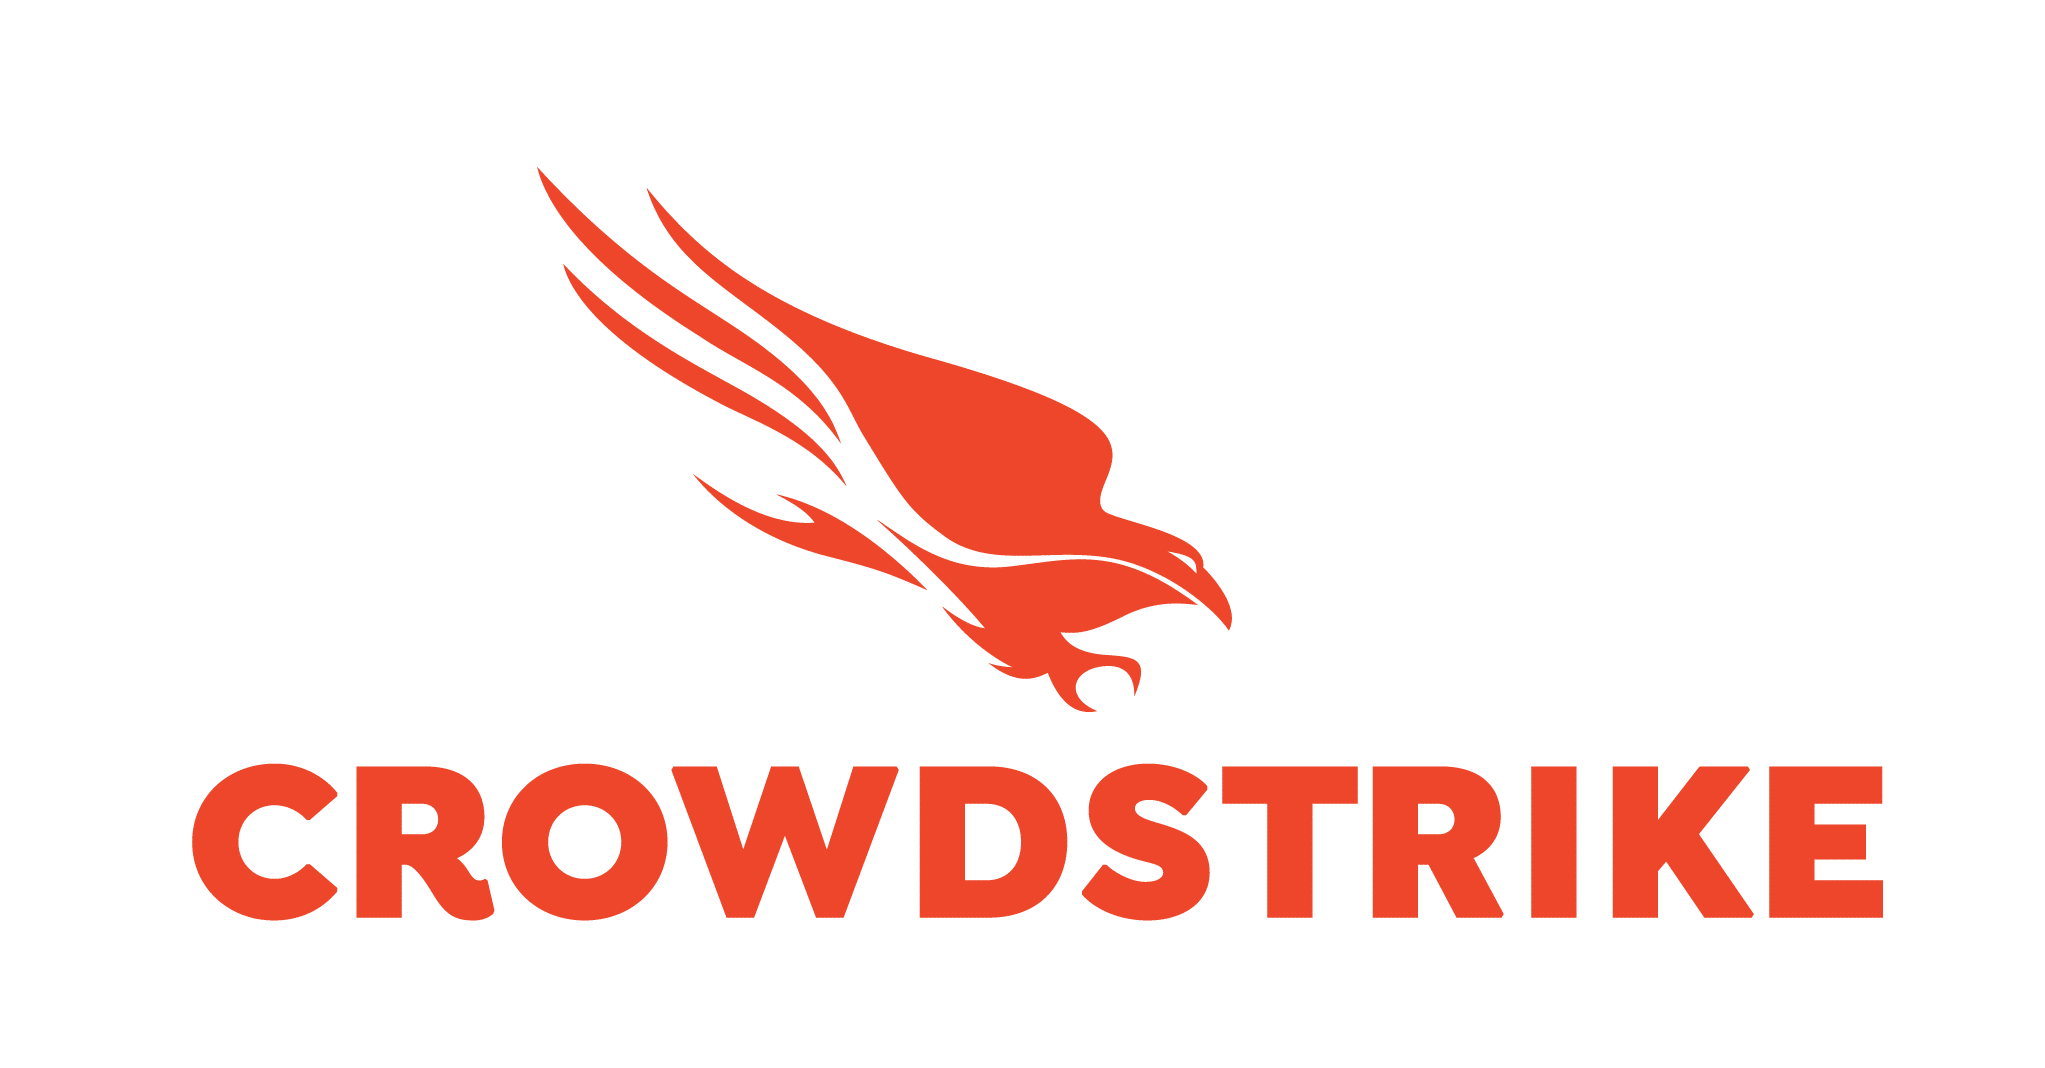 Crowdstrike will be a winner in 2022, this portfolio manager says